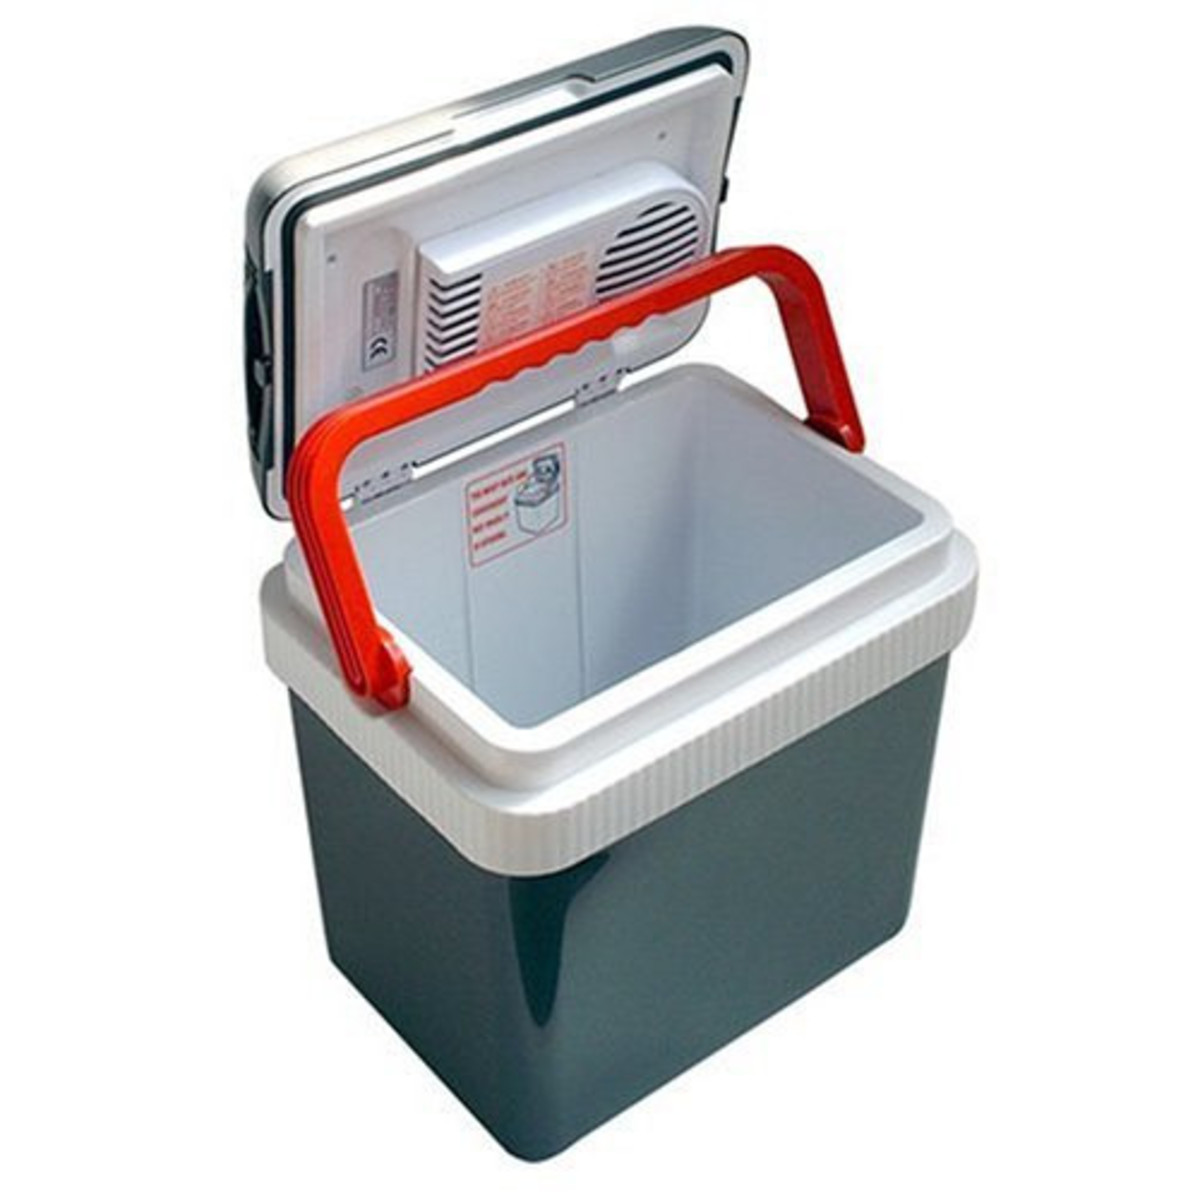 Electric Cooler